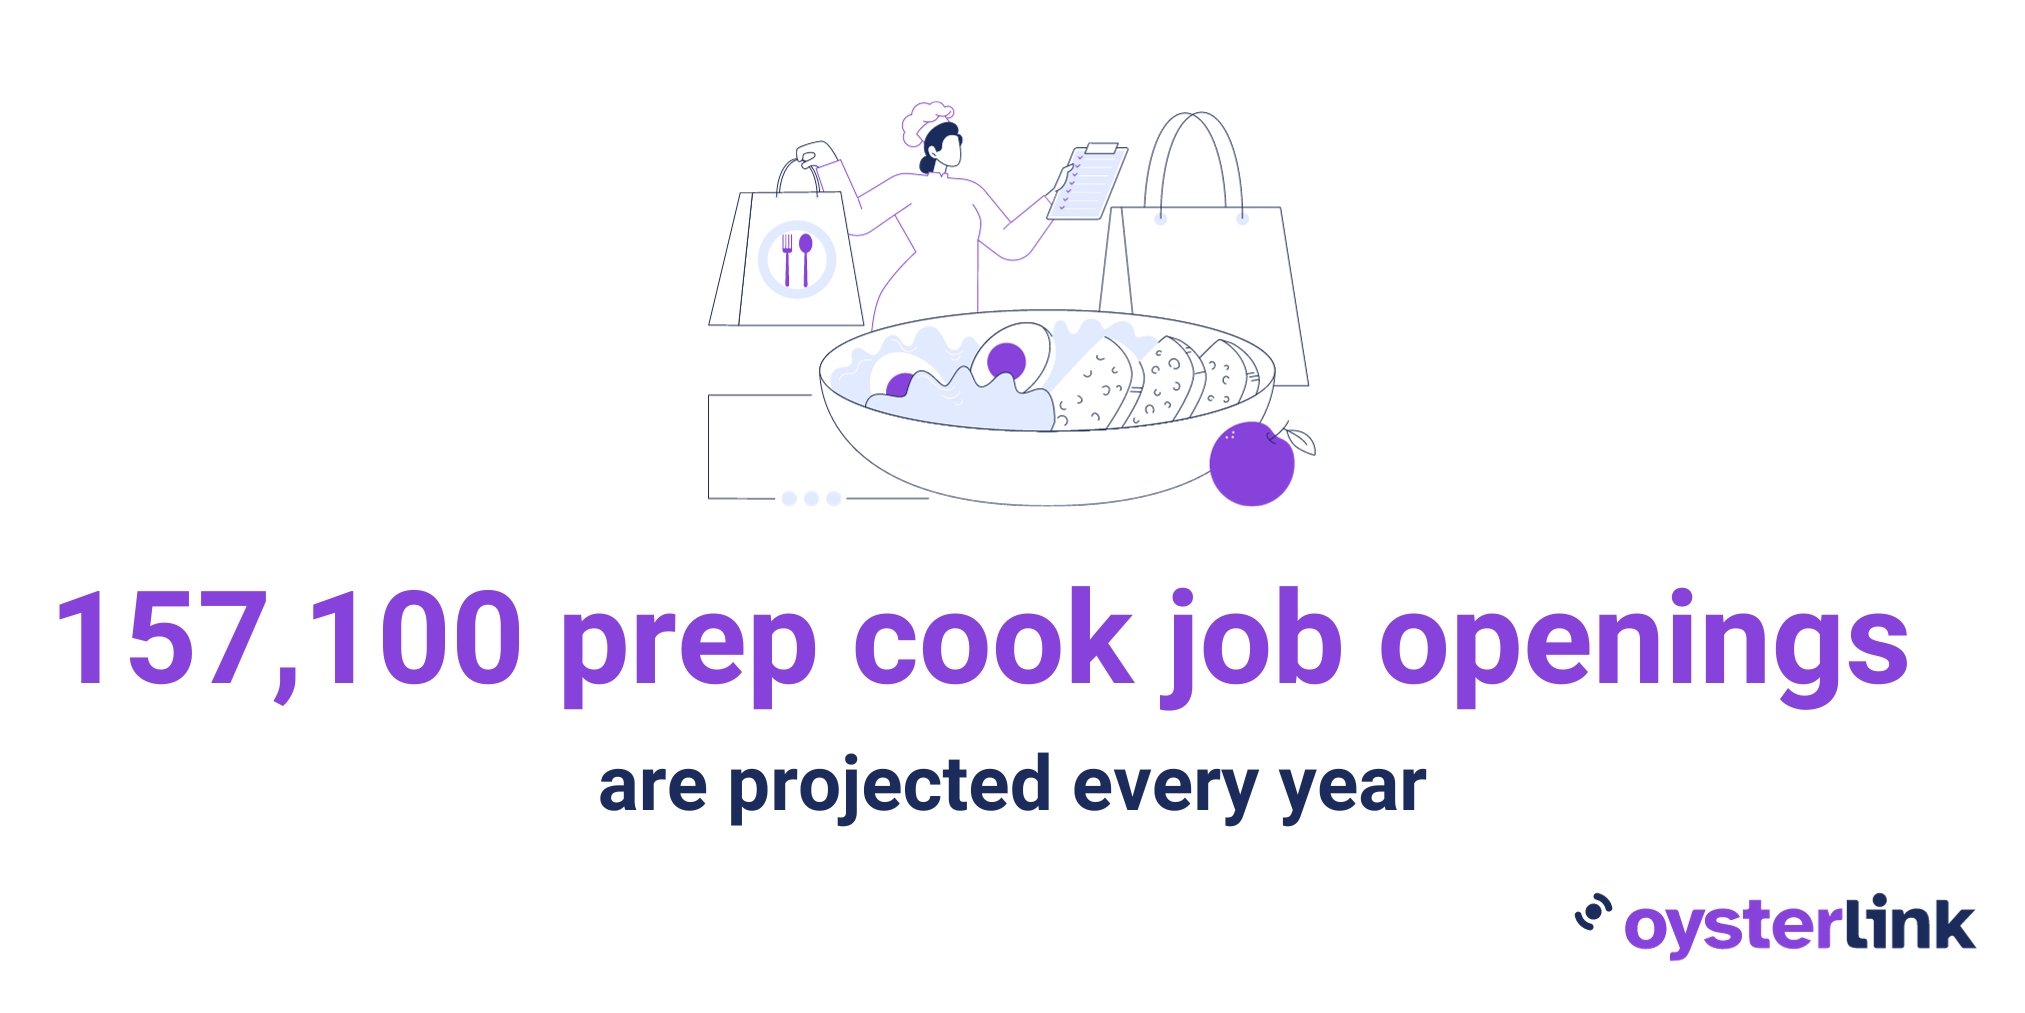 A graphic showing there are 157,100 prep cook job openings are projected every year